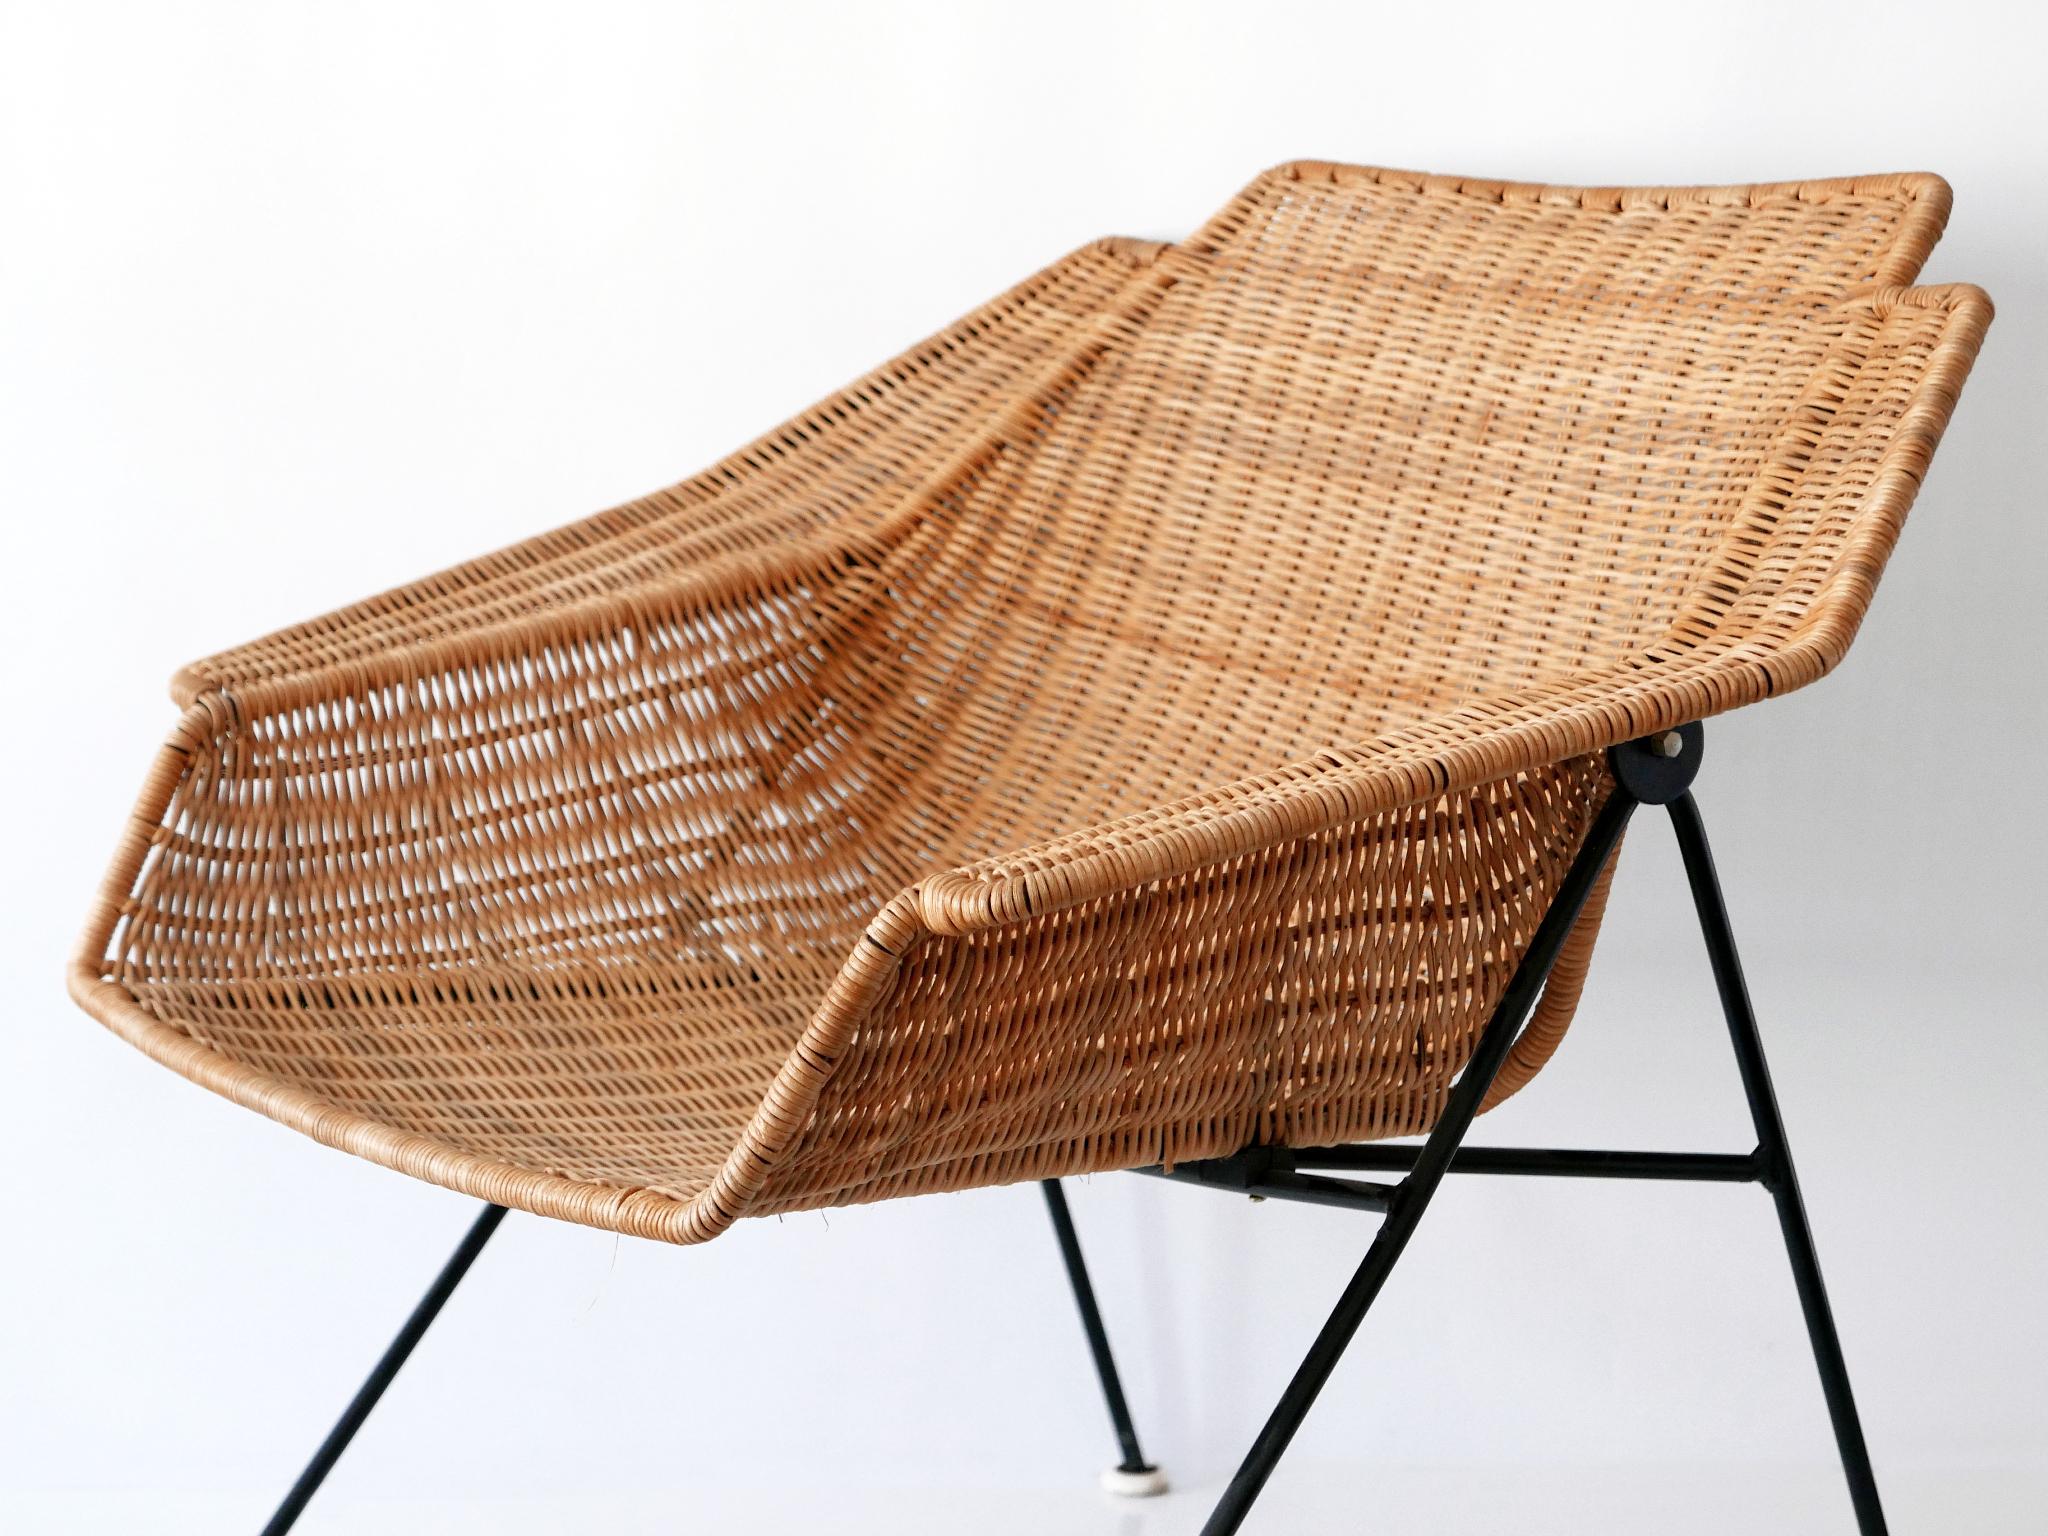 Metal Exceptional Mid-Century Modern Wicker Lounge Chair or Armchair 1950s Sweden For Sale